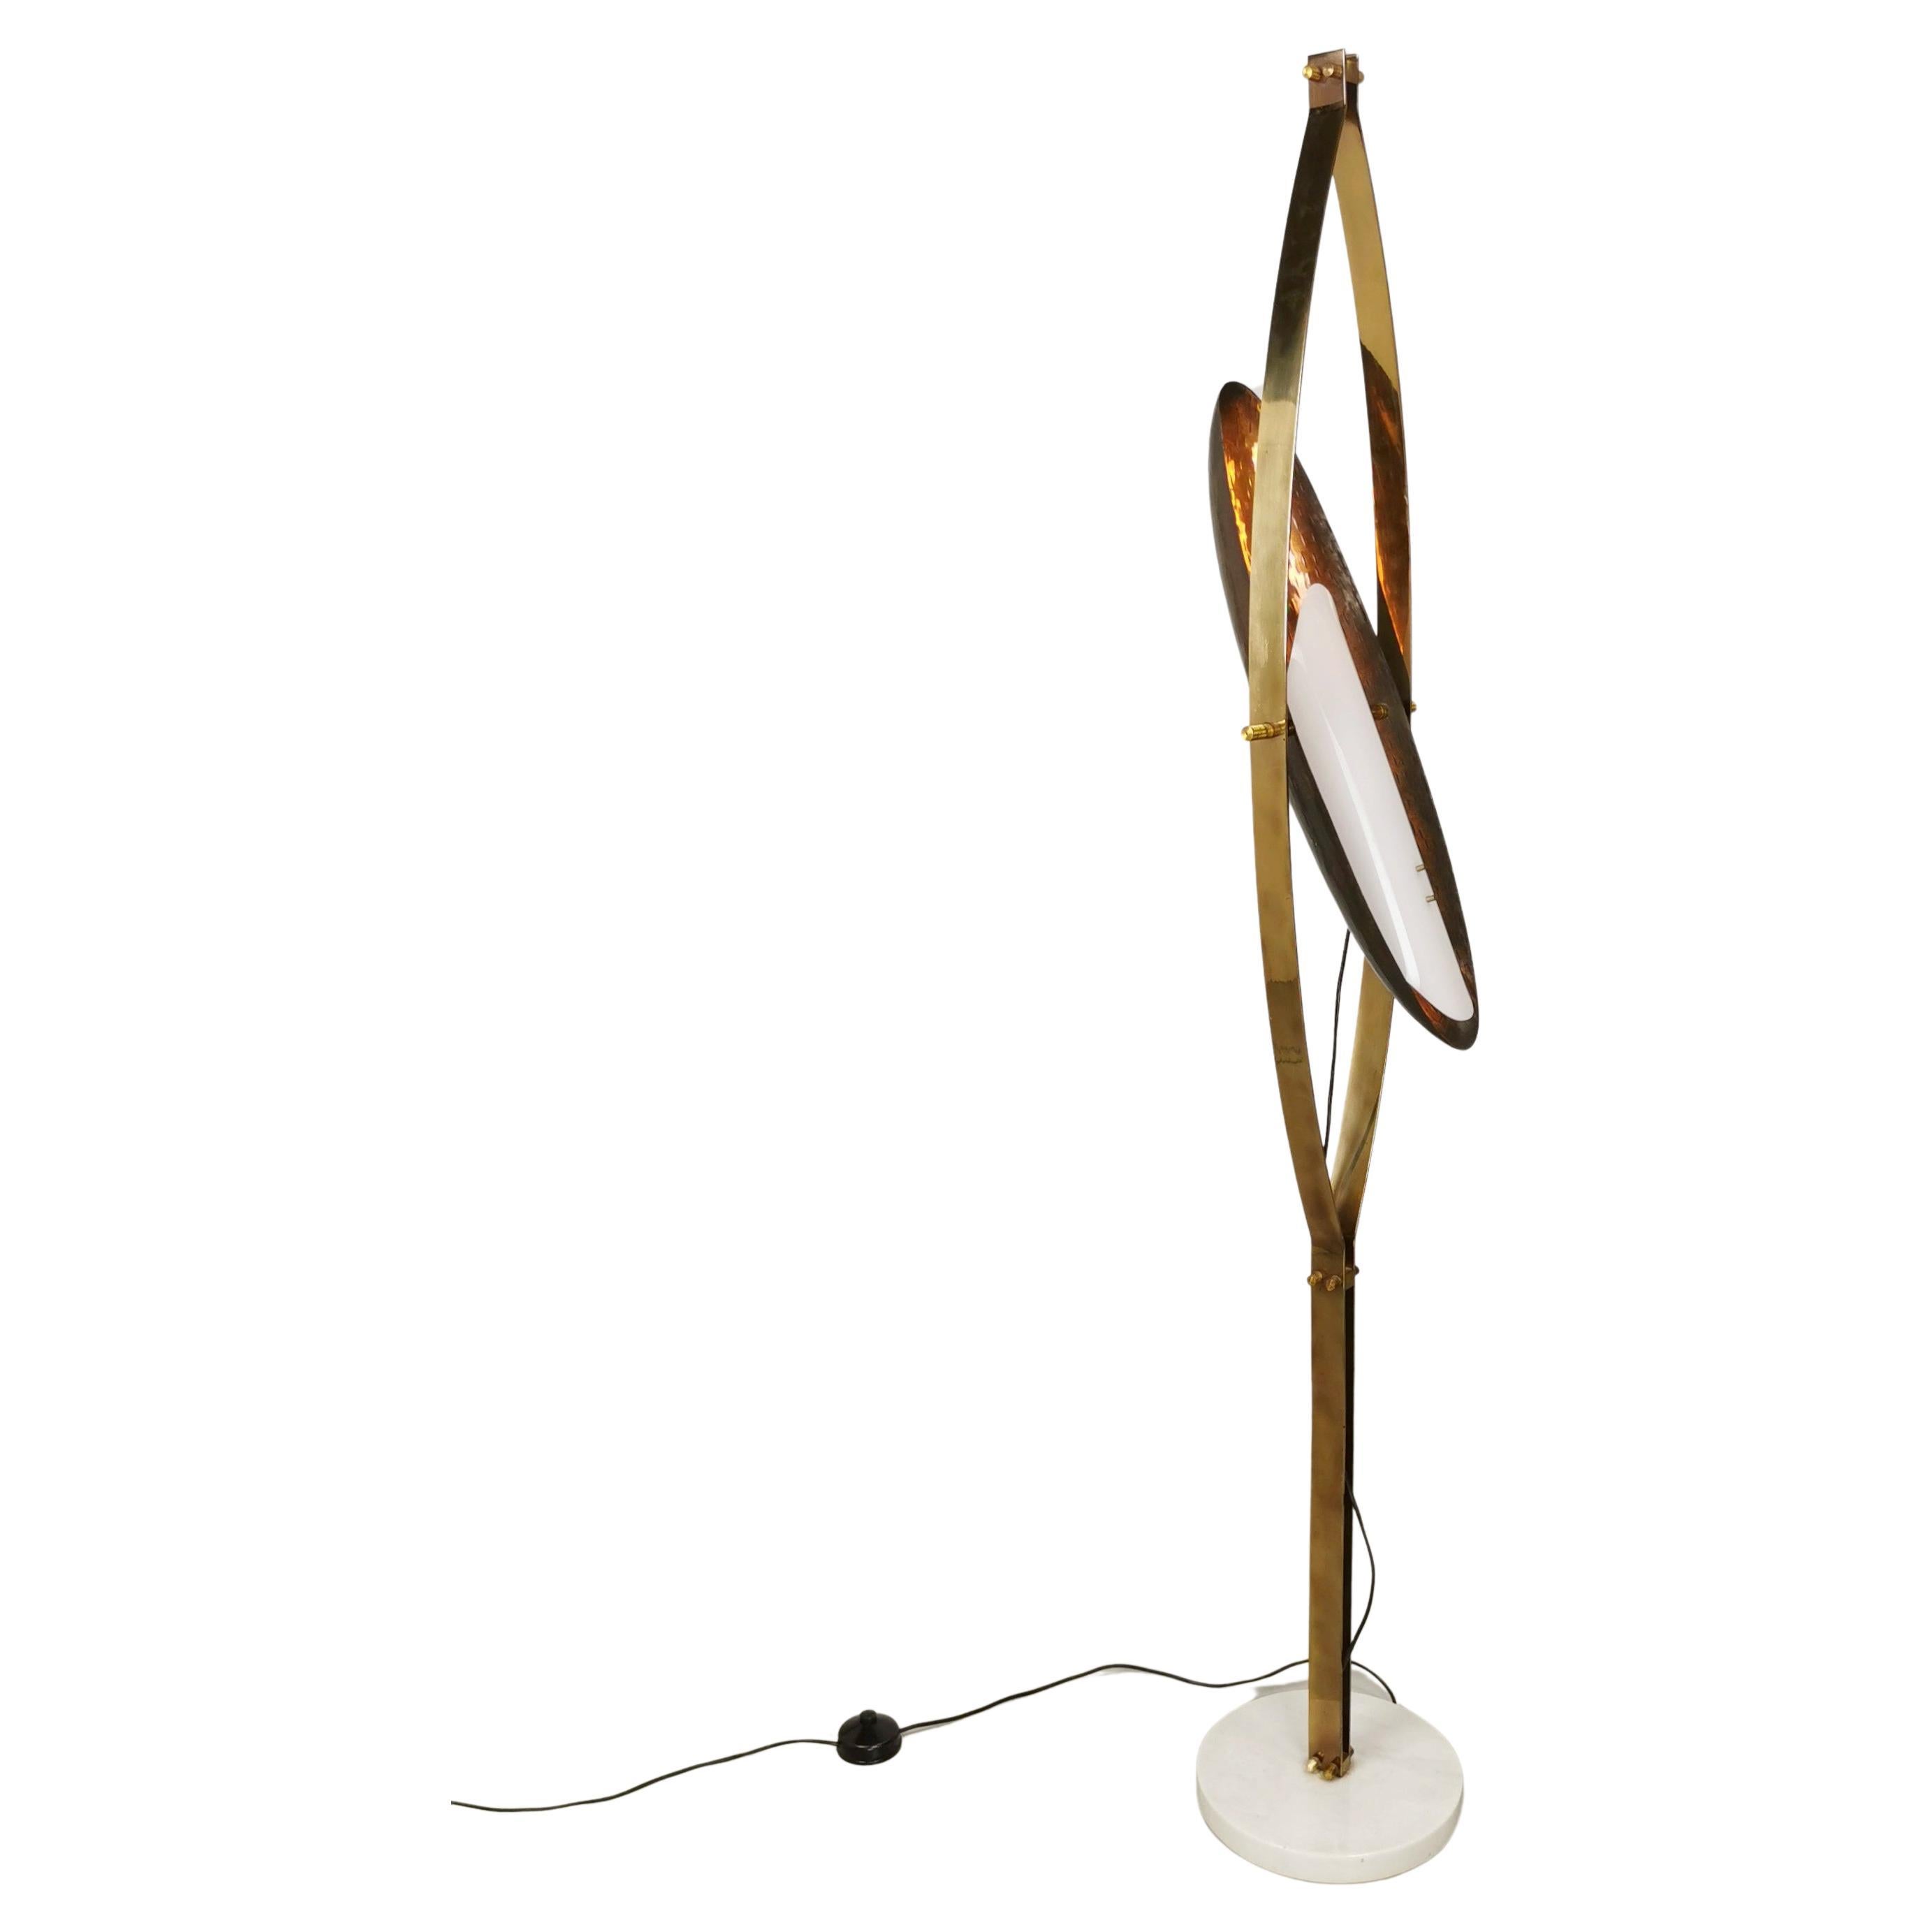 Rare Goffredo Reggiani Floor Lamp Marble base brass stem copper diffuser and plexi dome. Very unusual object whose production is estimated to be between the 1950s and 1960s. 
Very good condition has no defects
